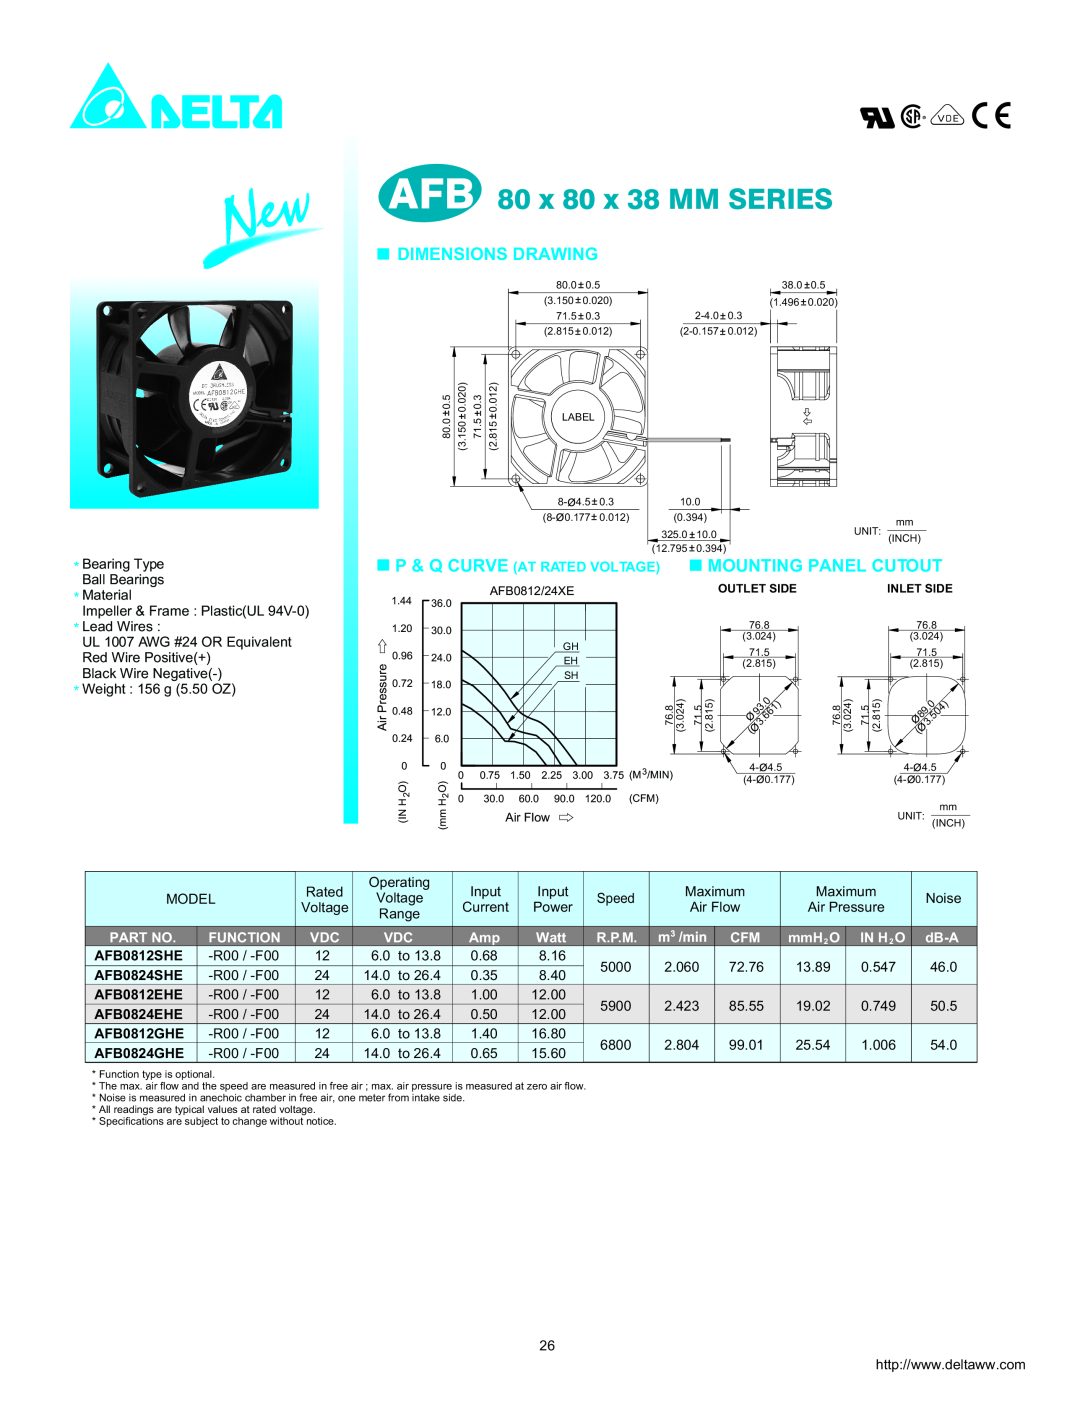 Delta Electronics AFB0824EHE dimensions AFB 80 x 80 x 38 MM SERIES, Dimensions Drawing, Mounting Panel Cutout, Function 